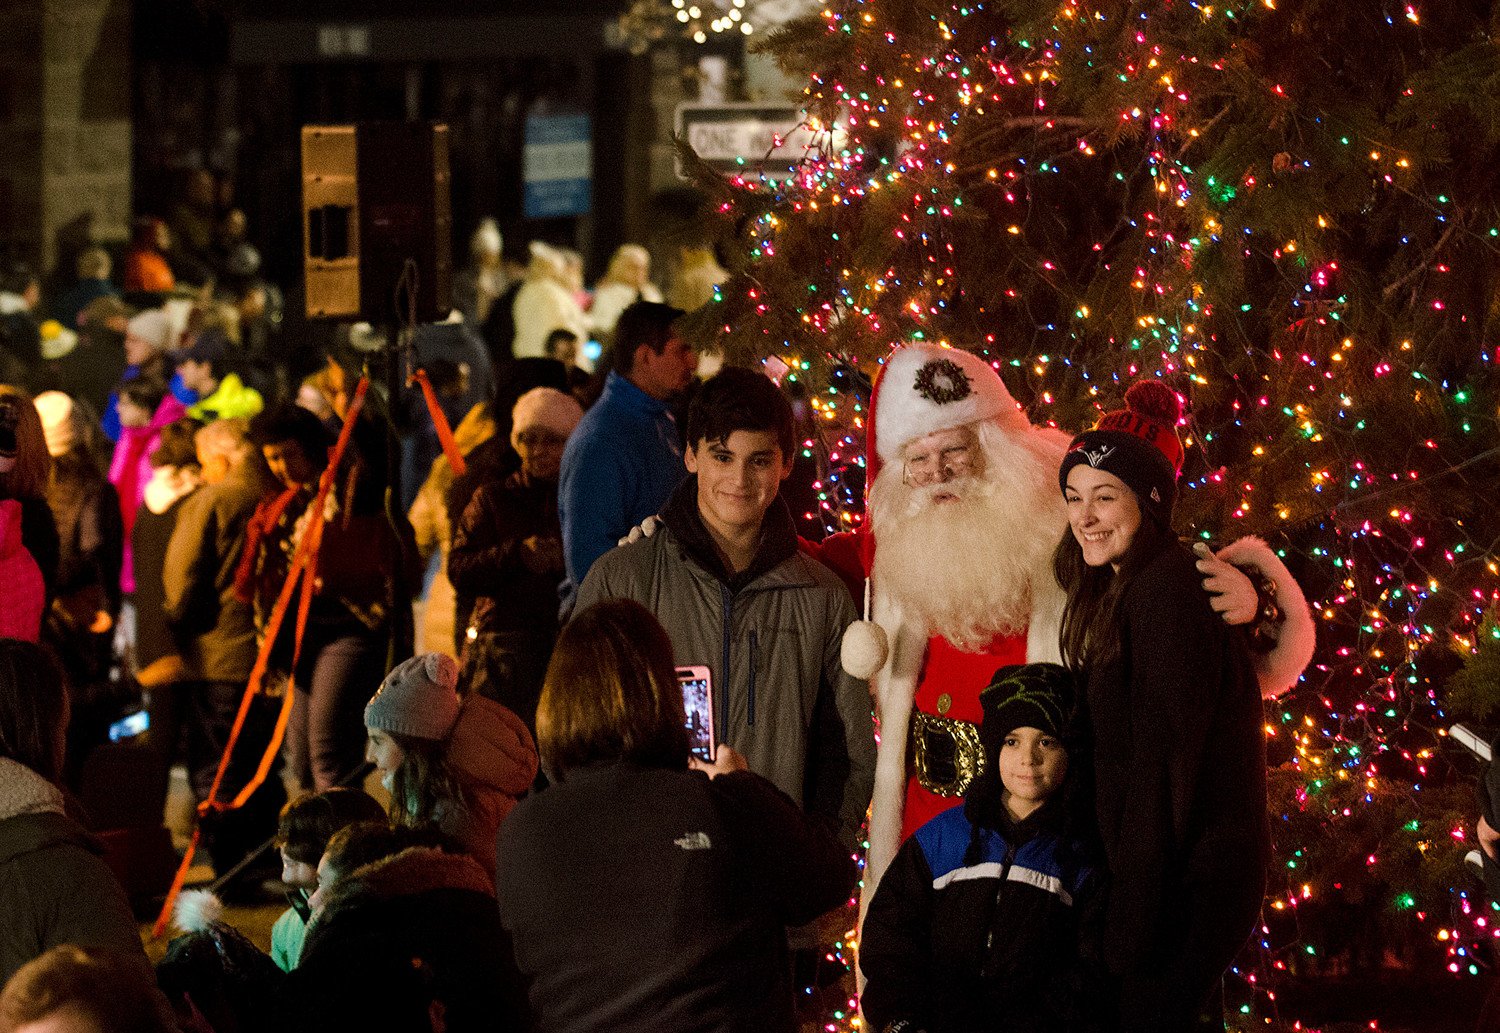 Santa takes photos with families after the lighting.